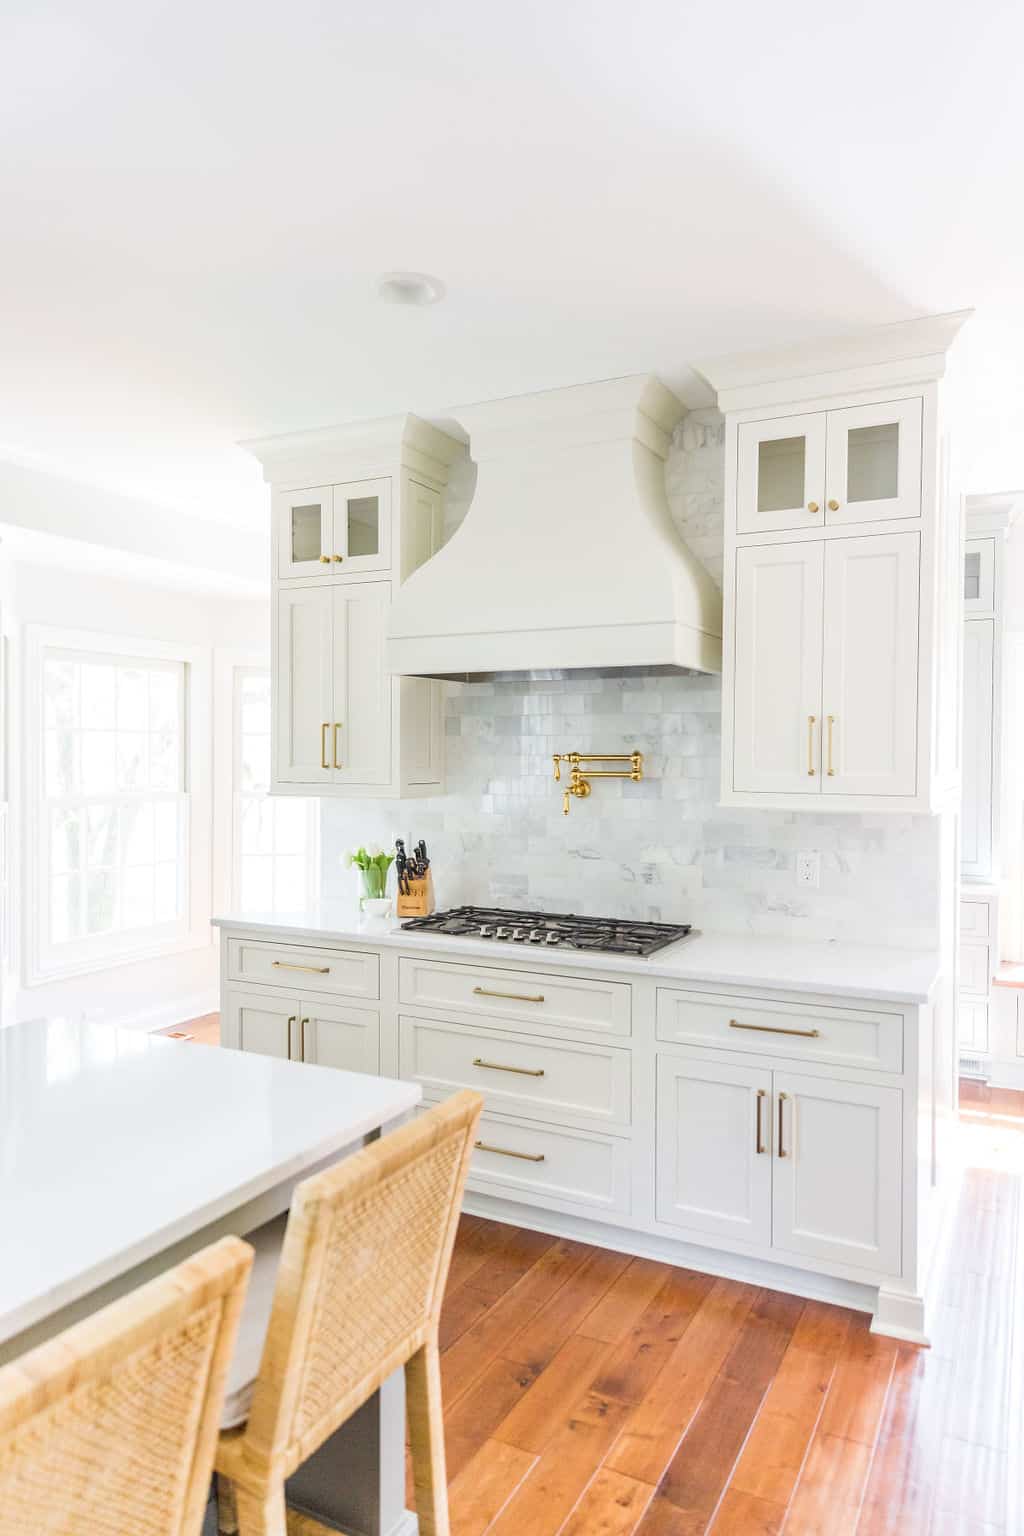 Nicholas Design Build | Remodel a white kitchen with wood floors and wicker chairs.